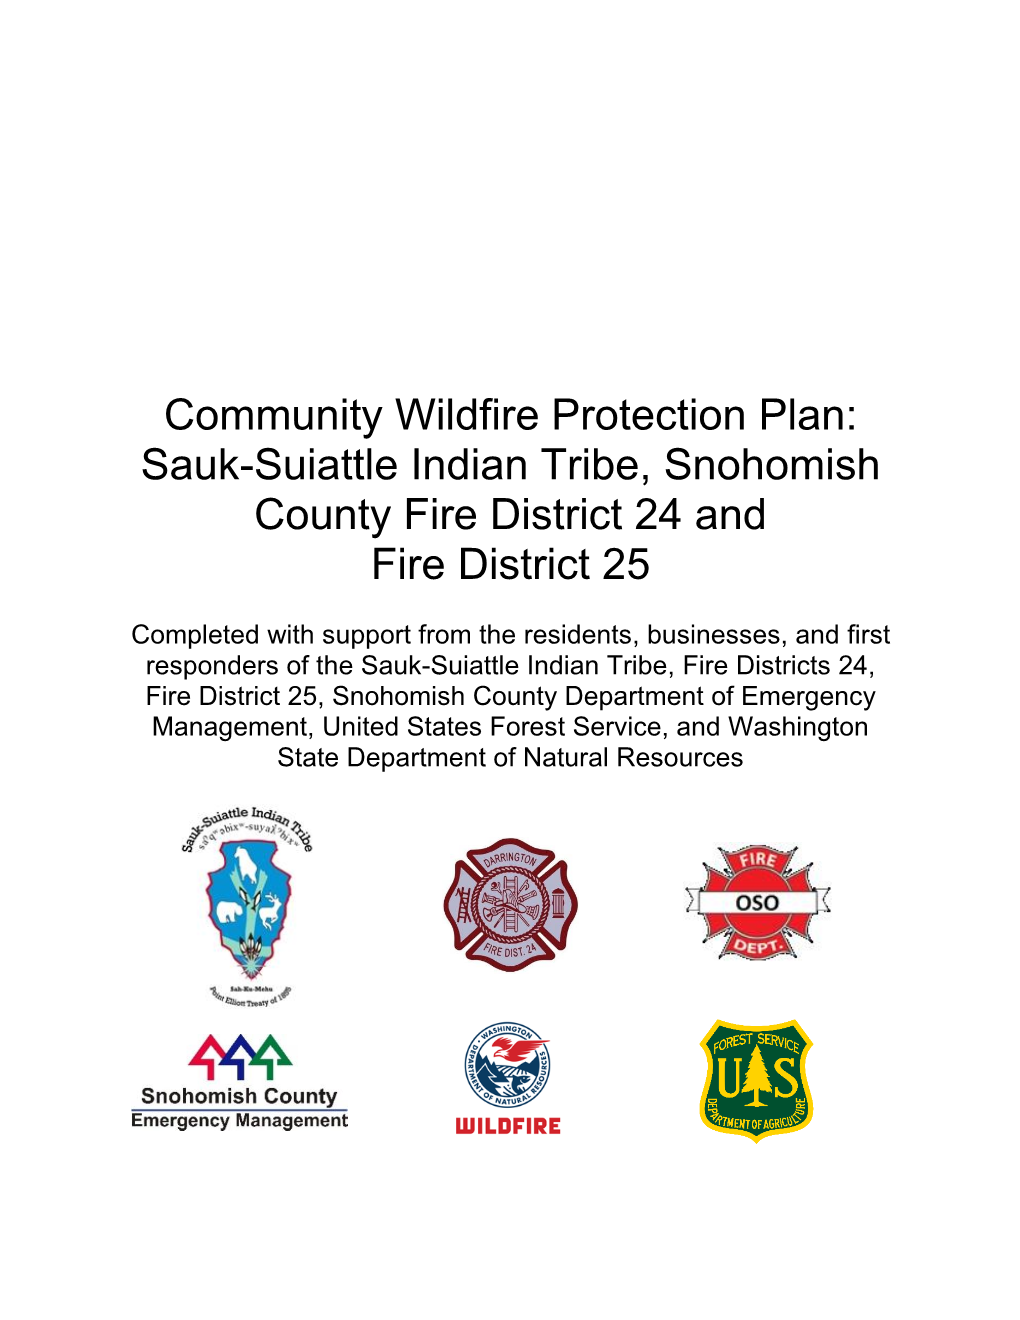 Community Wildfire Protection Plan: Sauk-Suiattle Indian Tribe, Snohomish County Fire District 24 and Fire District 25